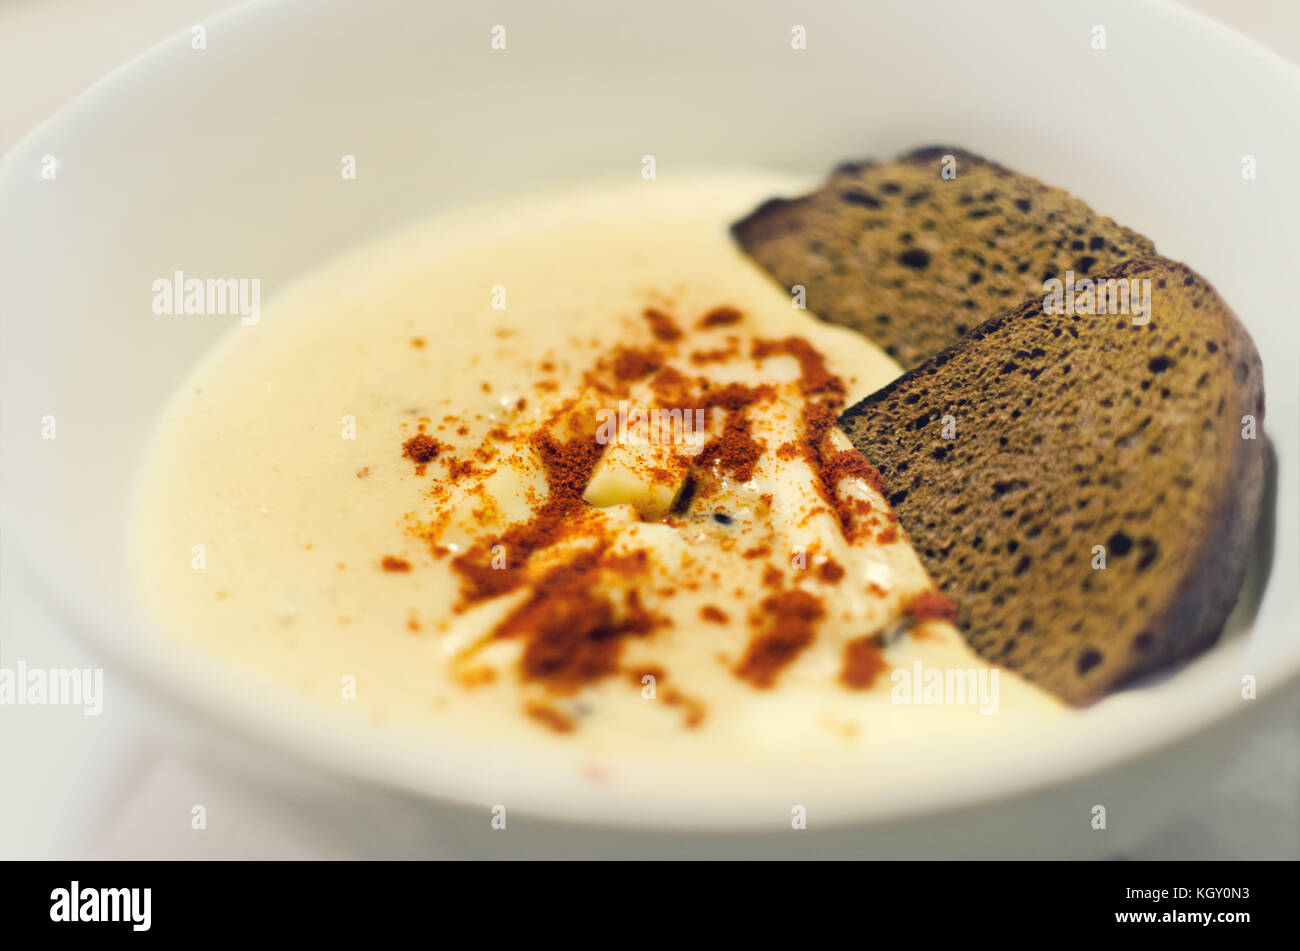 Cream soup sprinkled with paprika with rye bread in a white plate. Photo with shallow depth of field. Stock Photo